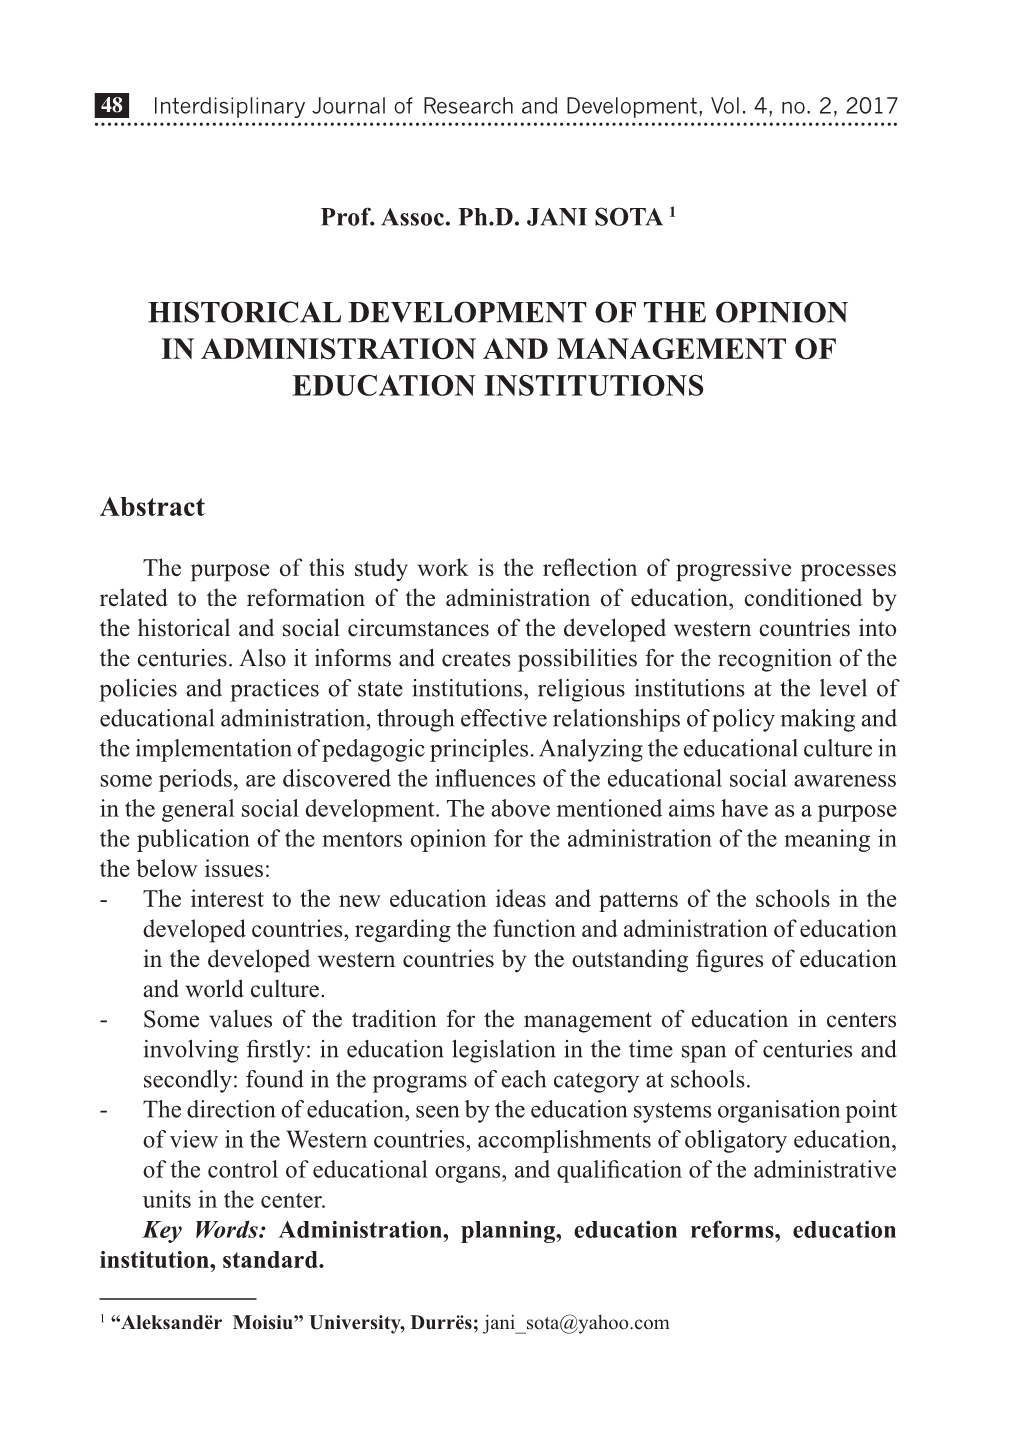 Historical Development of the Opinion in Administration and Management of Education Institutions